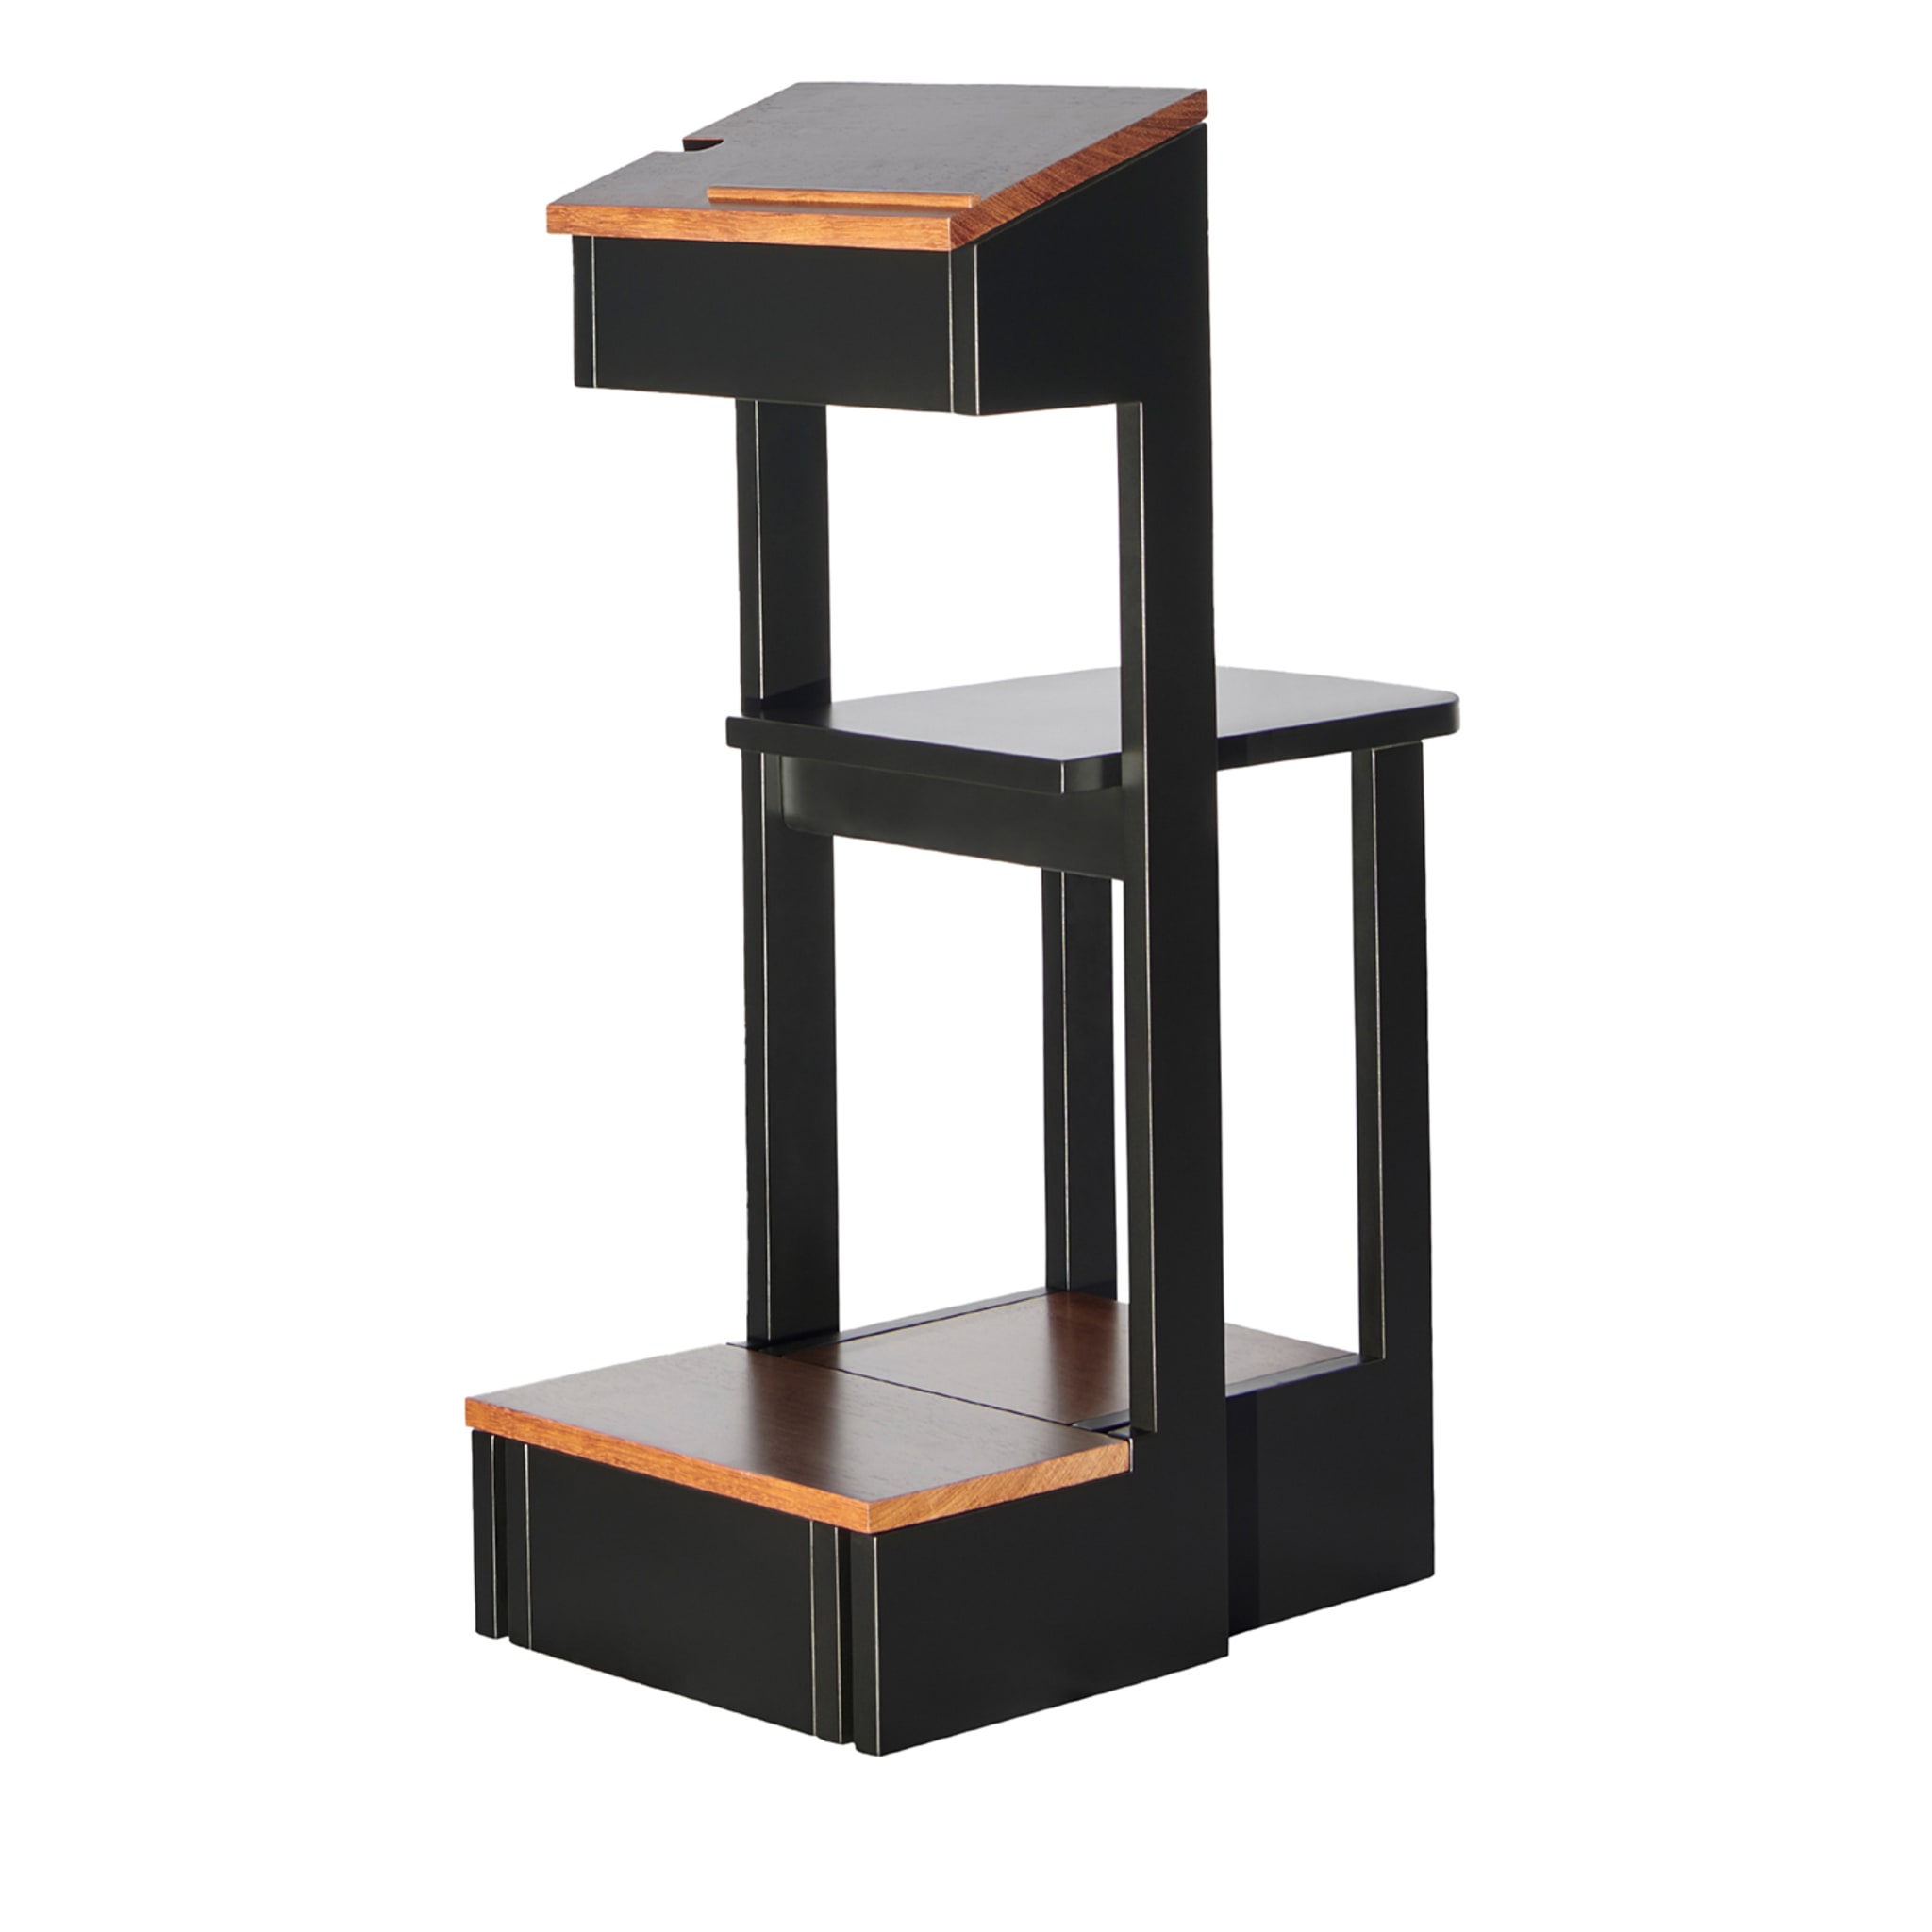 Trab A Multifunctional Unit Limited Edition by Standa - Main view